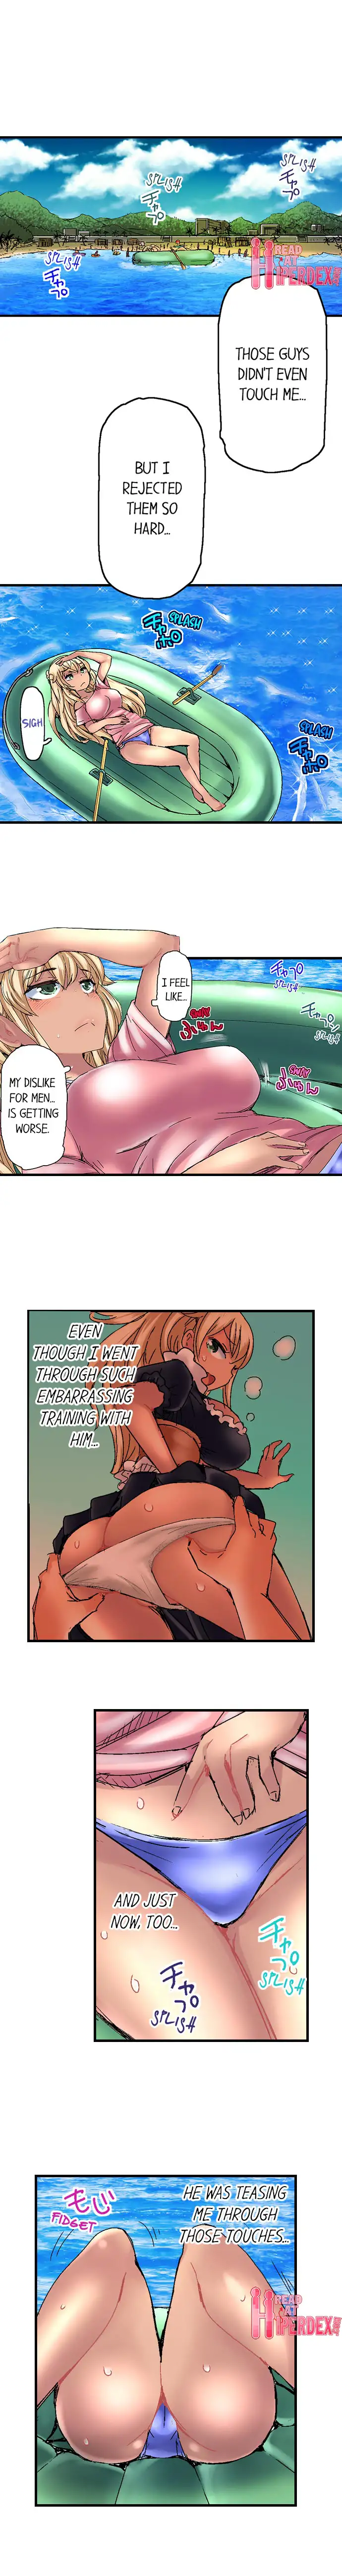 Taking a Hot Tanned Chick’s Virginity - Chapter 8 Page 8